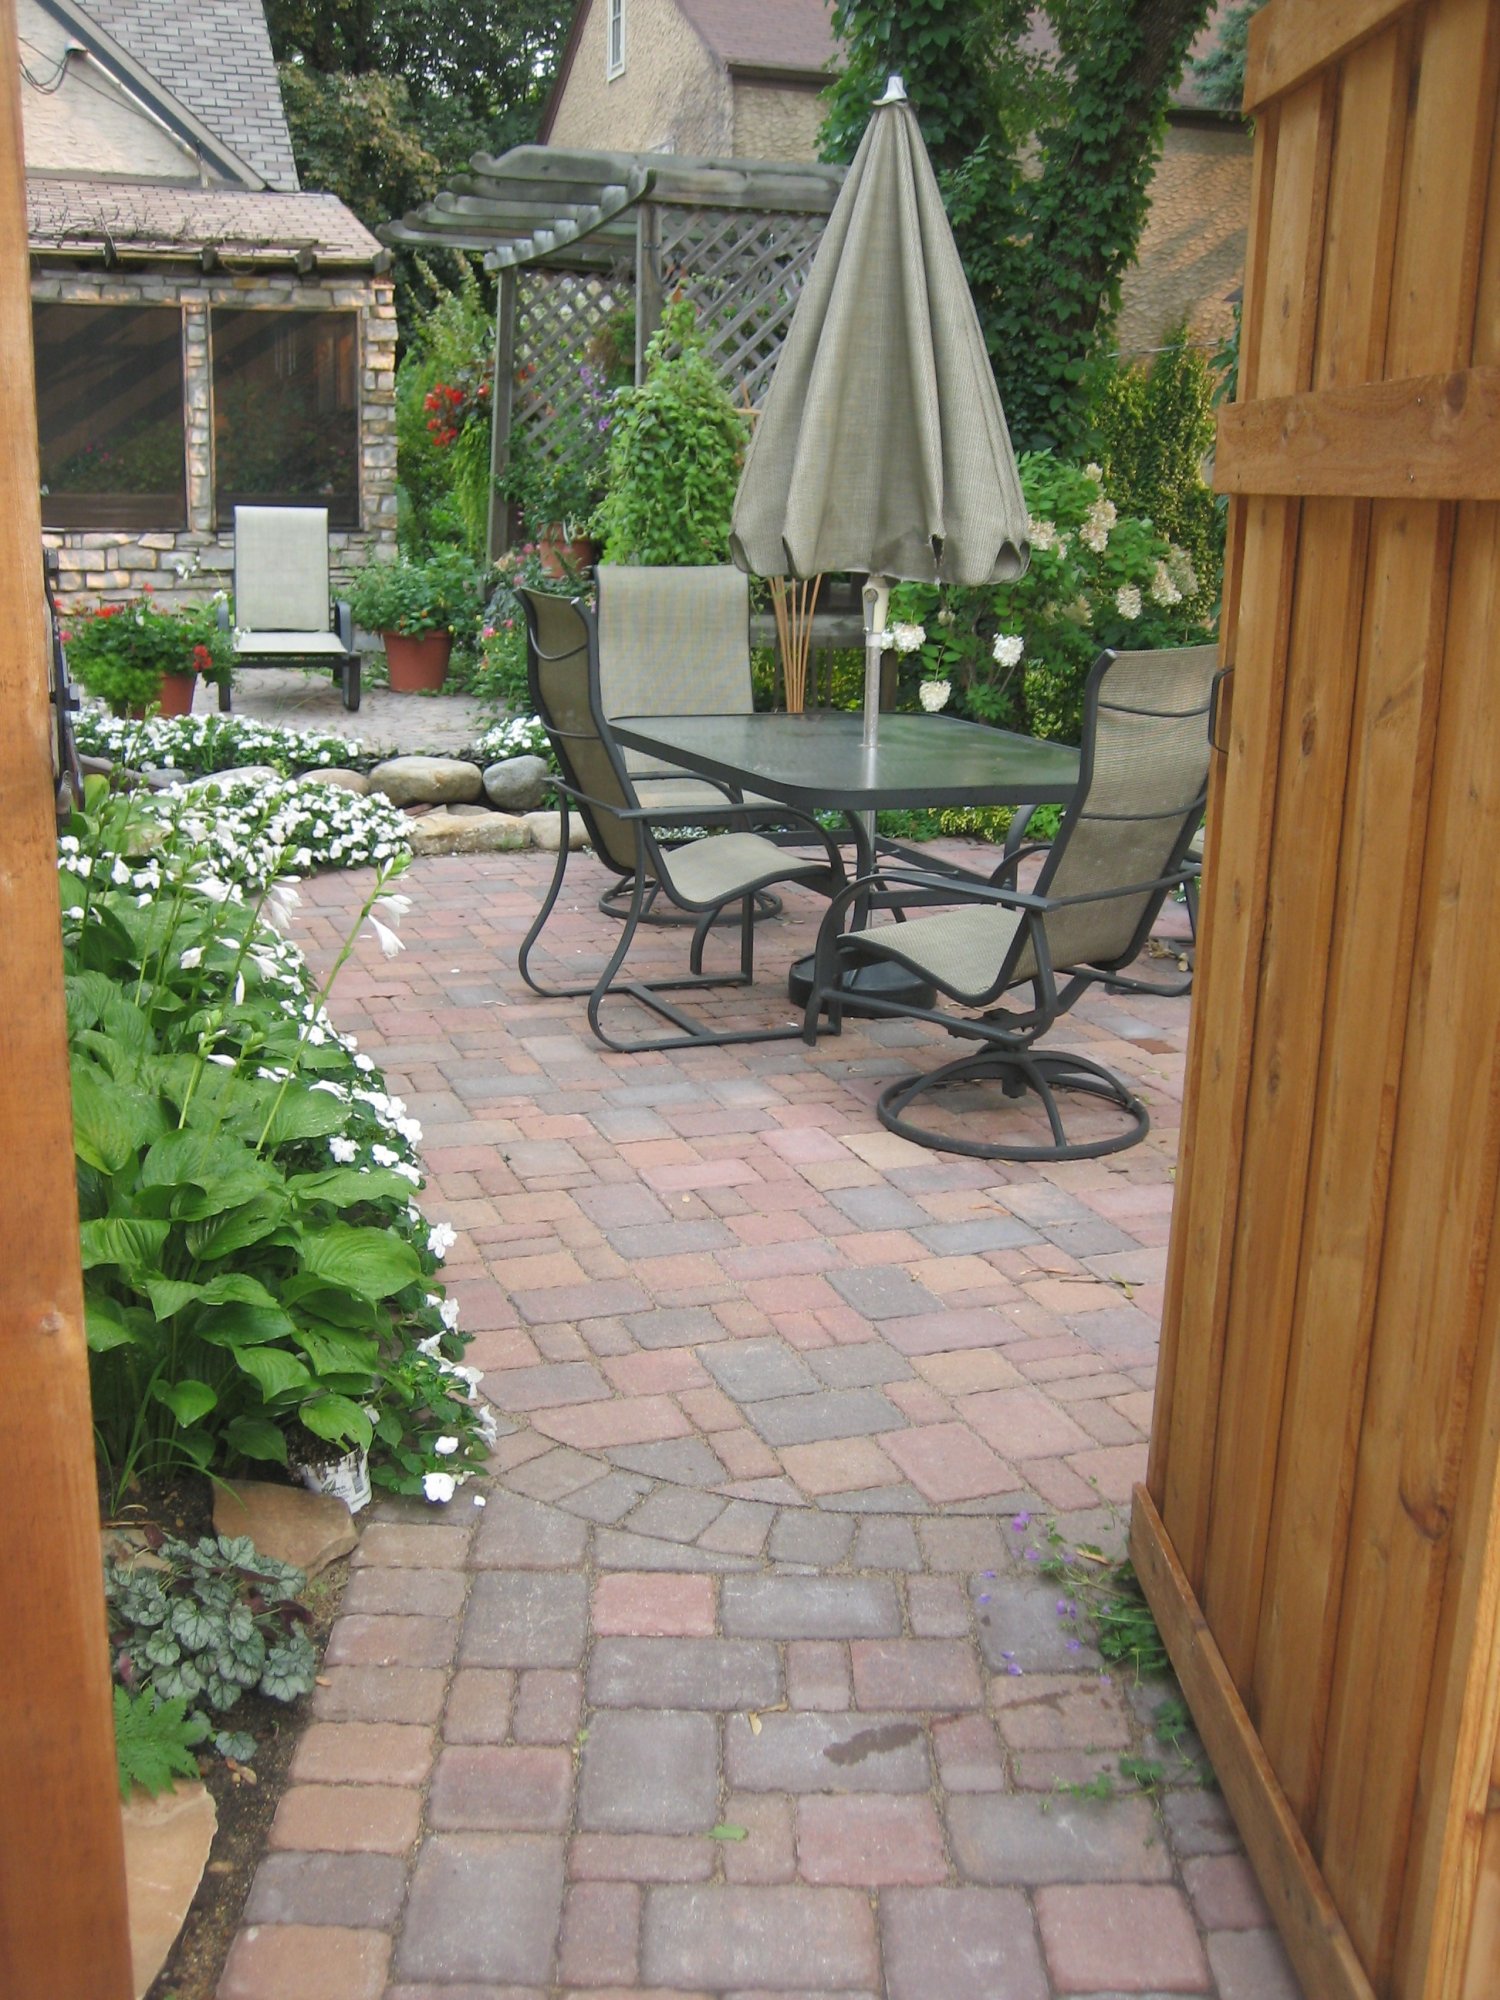 Borgert Paver Patio Installed in St. Paul